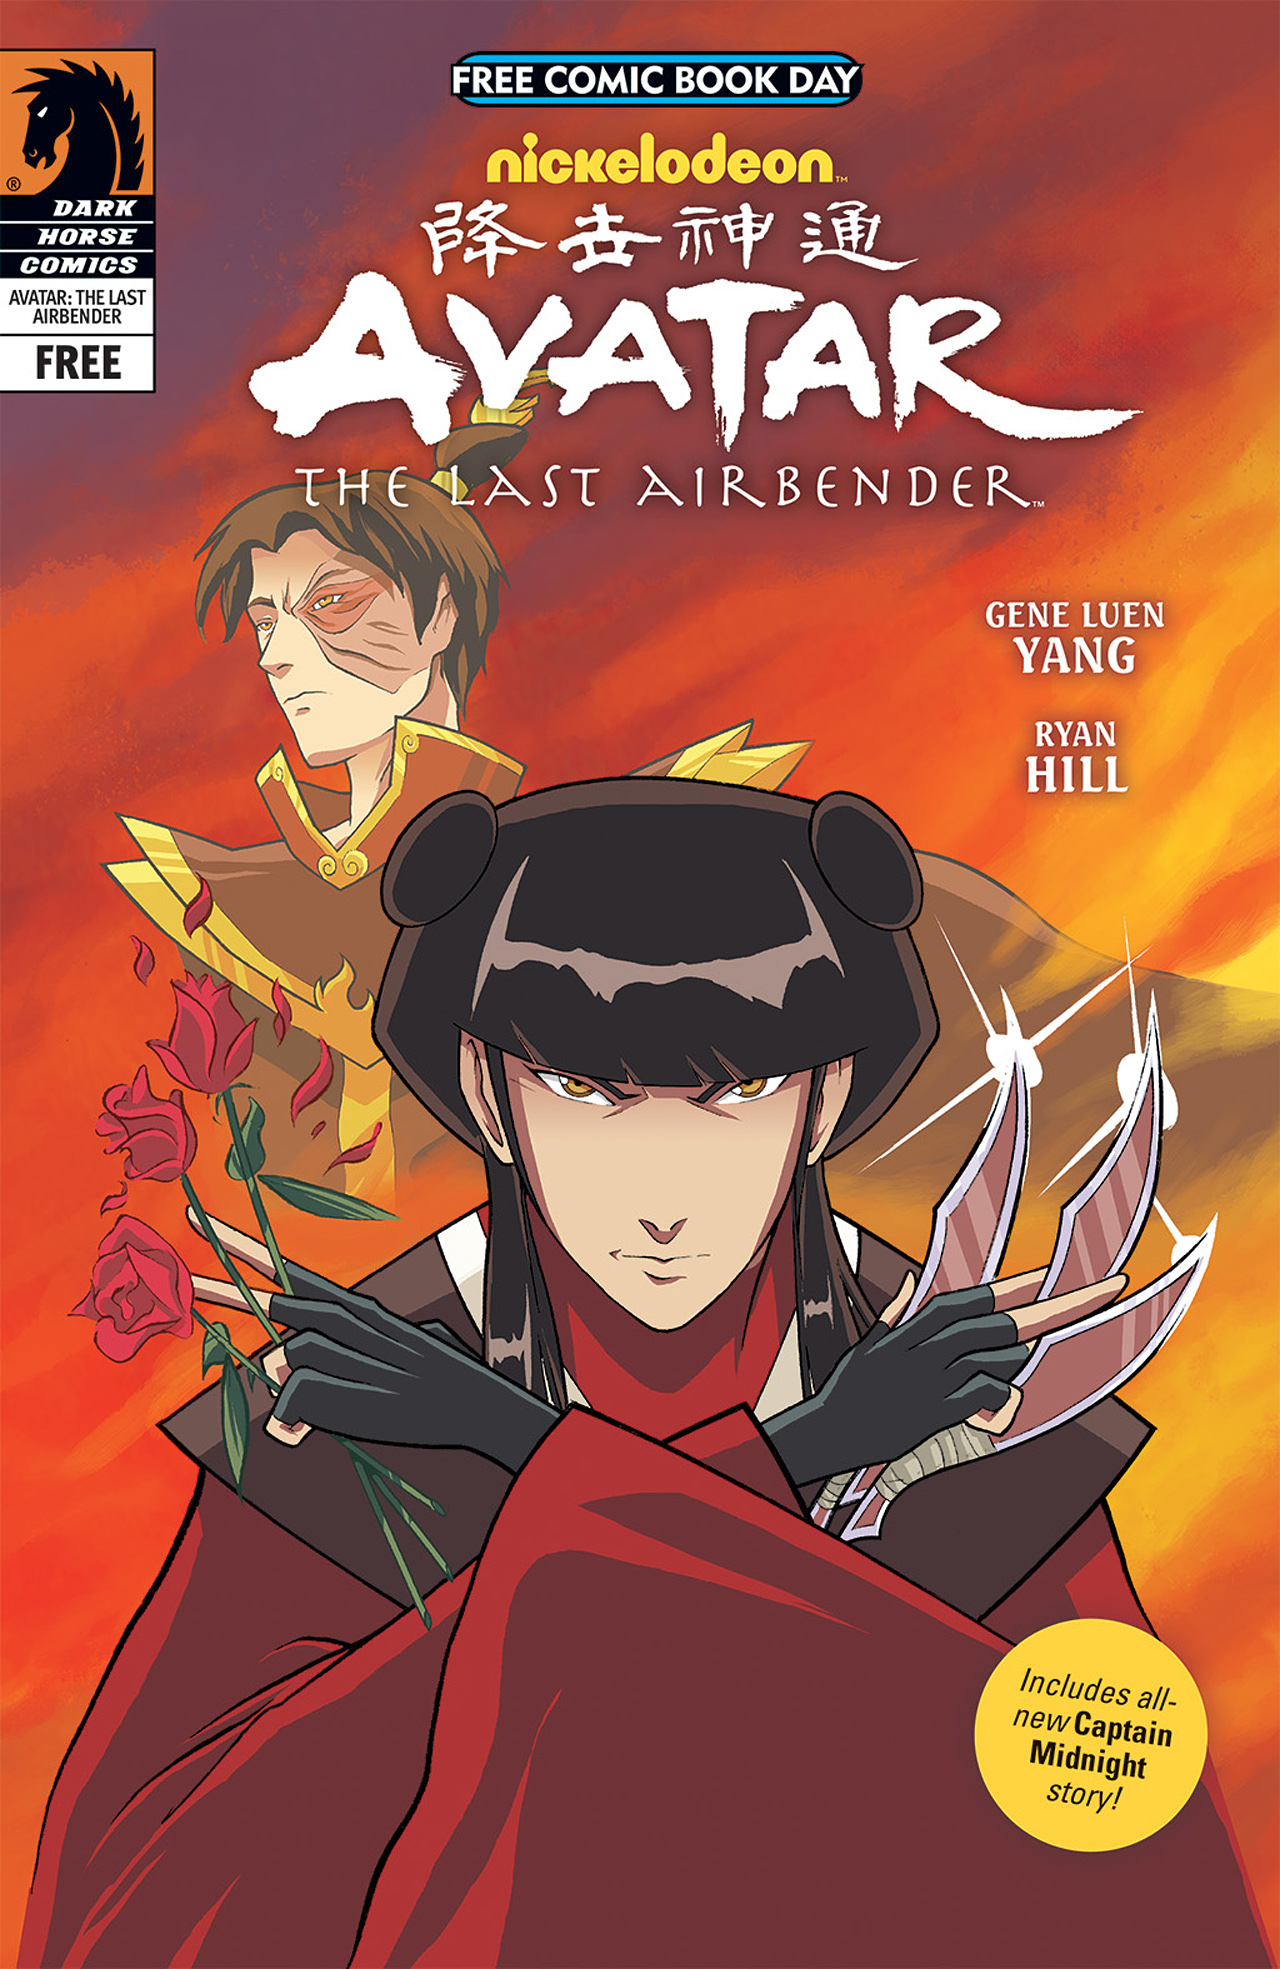 Read online Free Comic Book Day: Avatar - The Last Airbender/Star Wars and Captain Midnight comic -  Issue # Full - 21